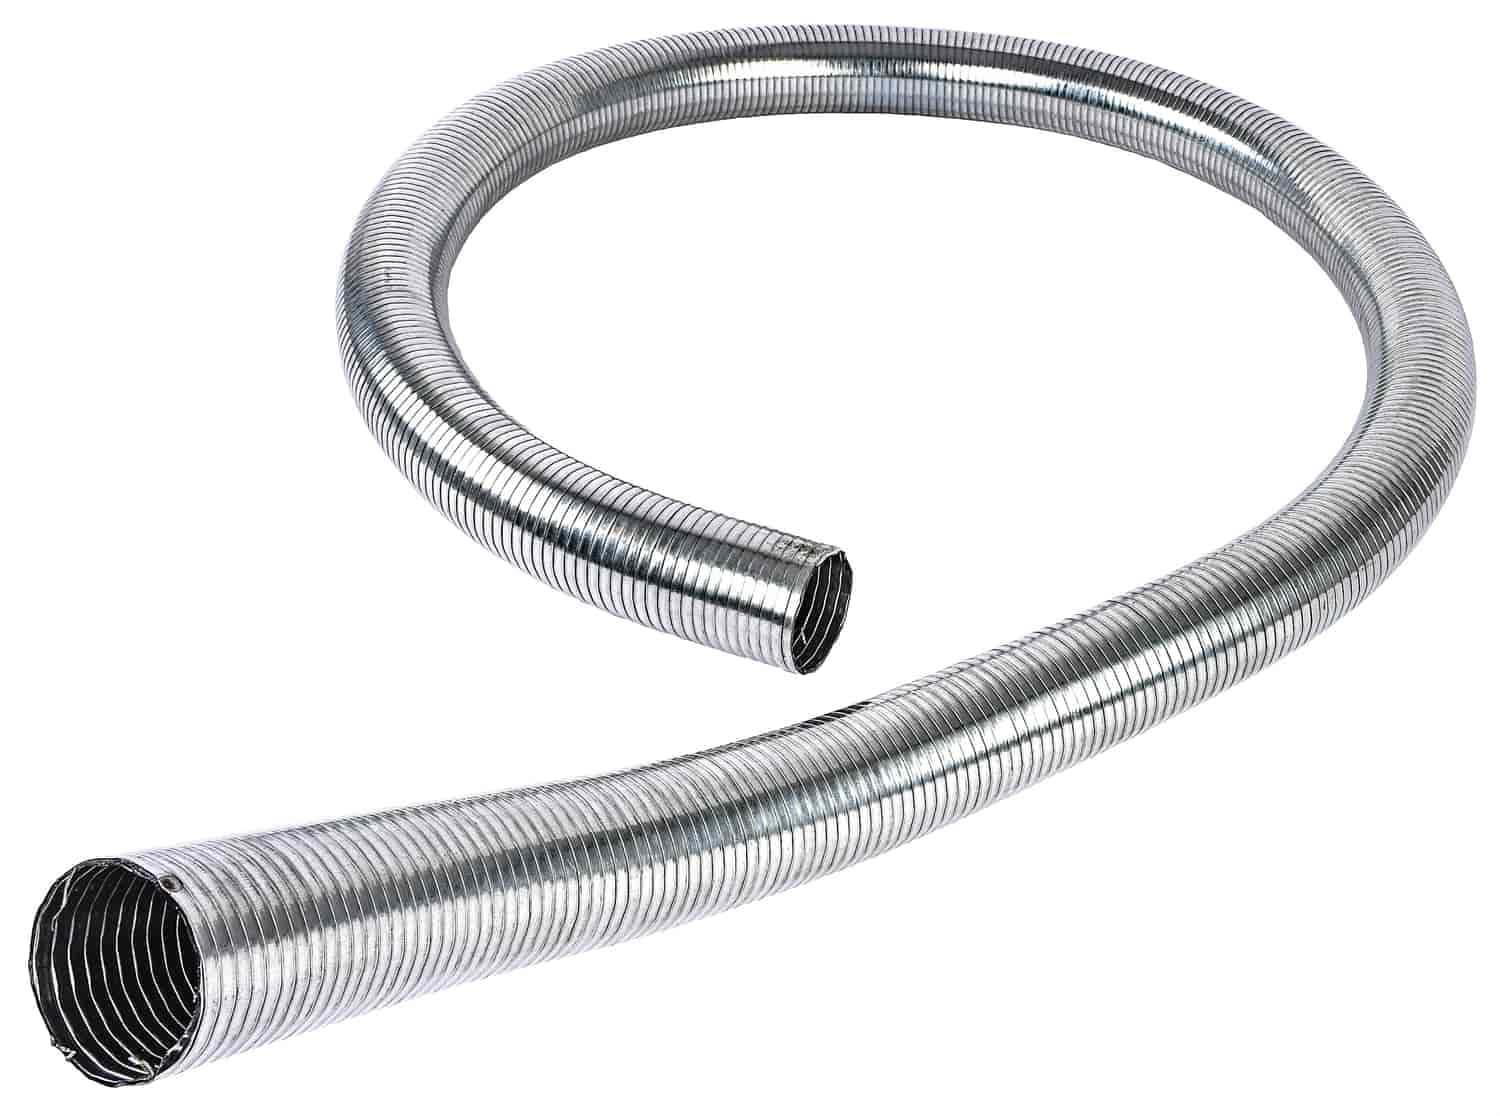 Exchaust Galvanized Pipe Flexible Steel Inside Diameter House Deals 2 Replacement Parts 